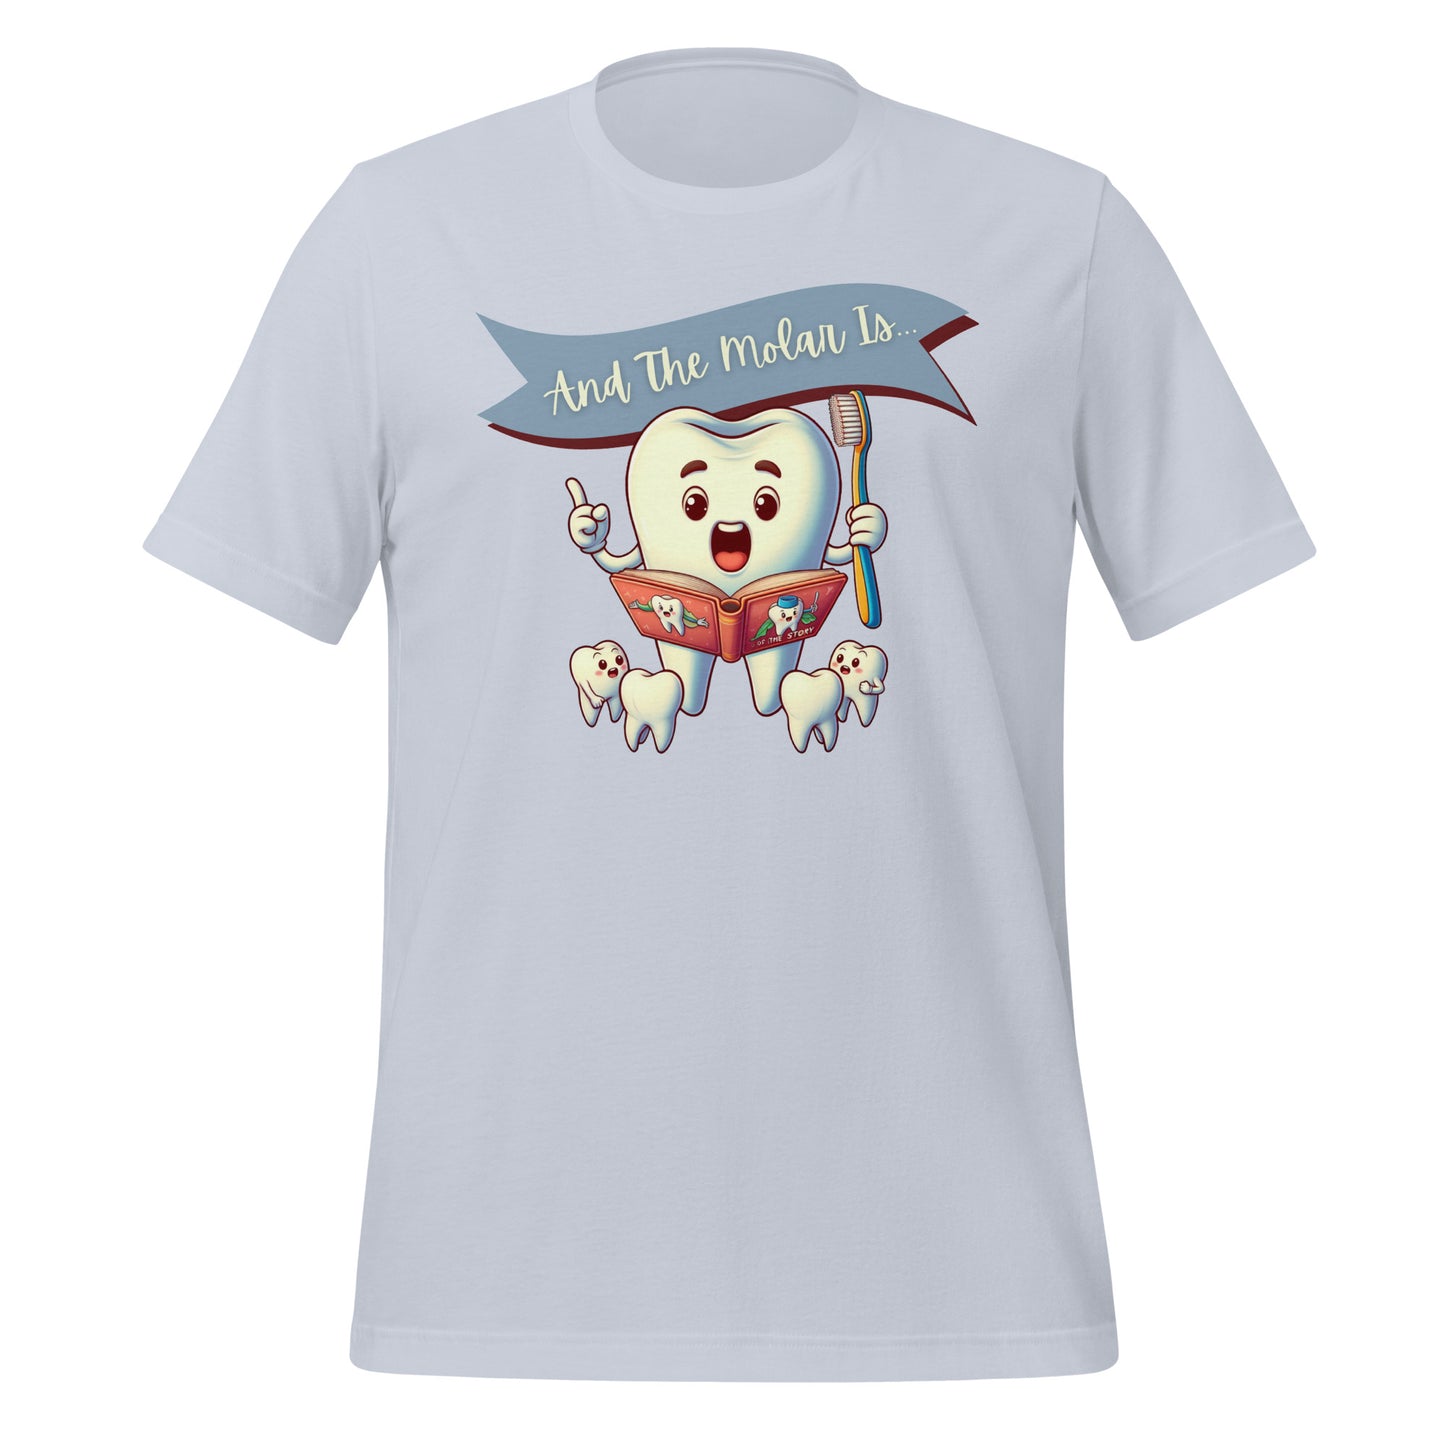 Cute dental shirt featuring a smiling tooth character reading a book with the caption ‘And The Molar Is,’ surrounded by smaller tooth characters. Light blue color.